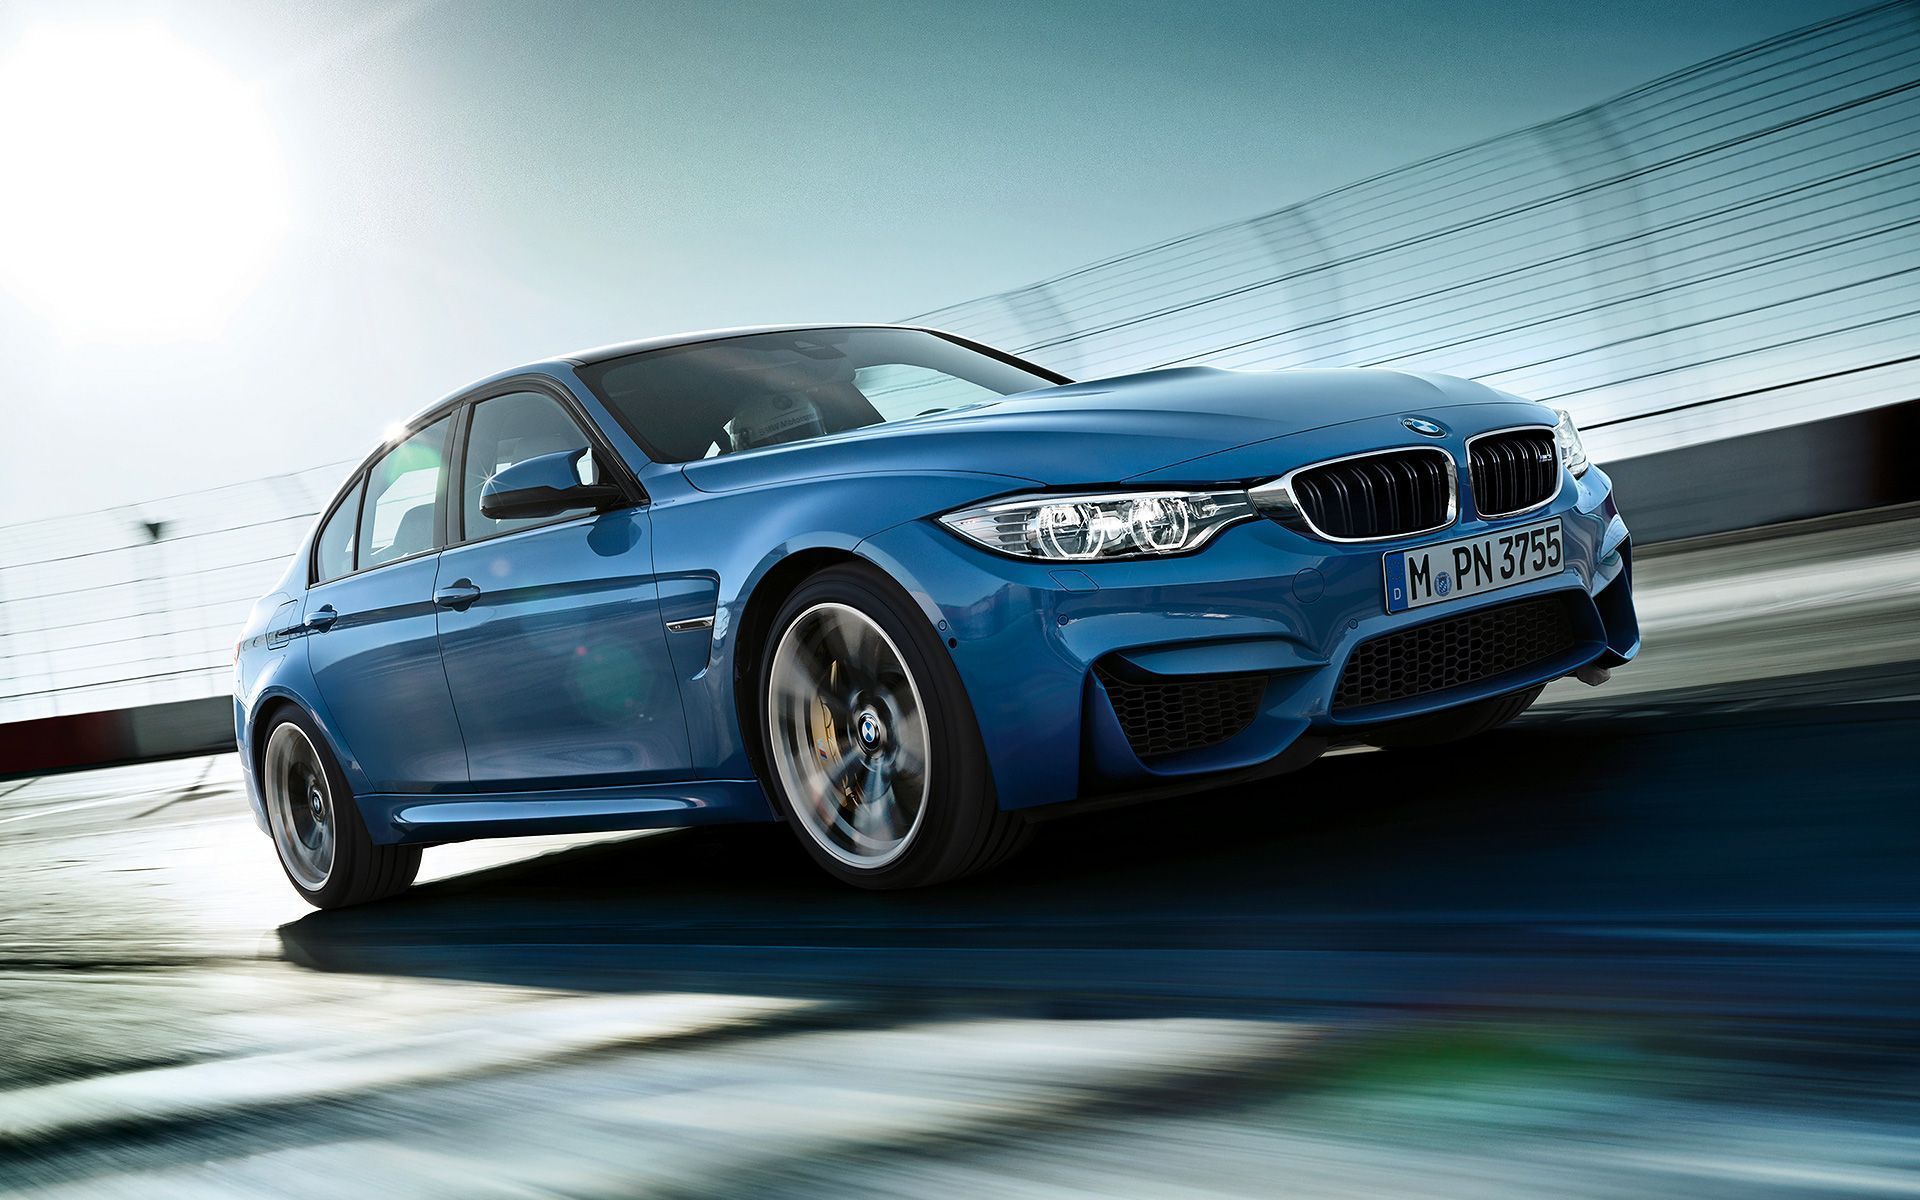 BMW M4 and BMW M3 Wallpapers - DOWNLOAD NOW!